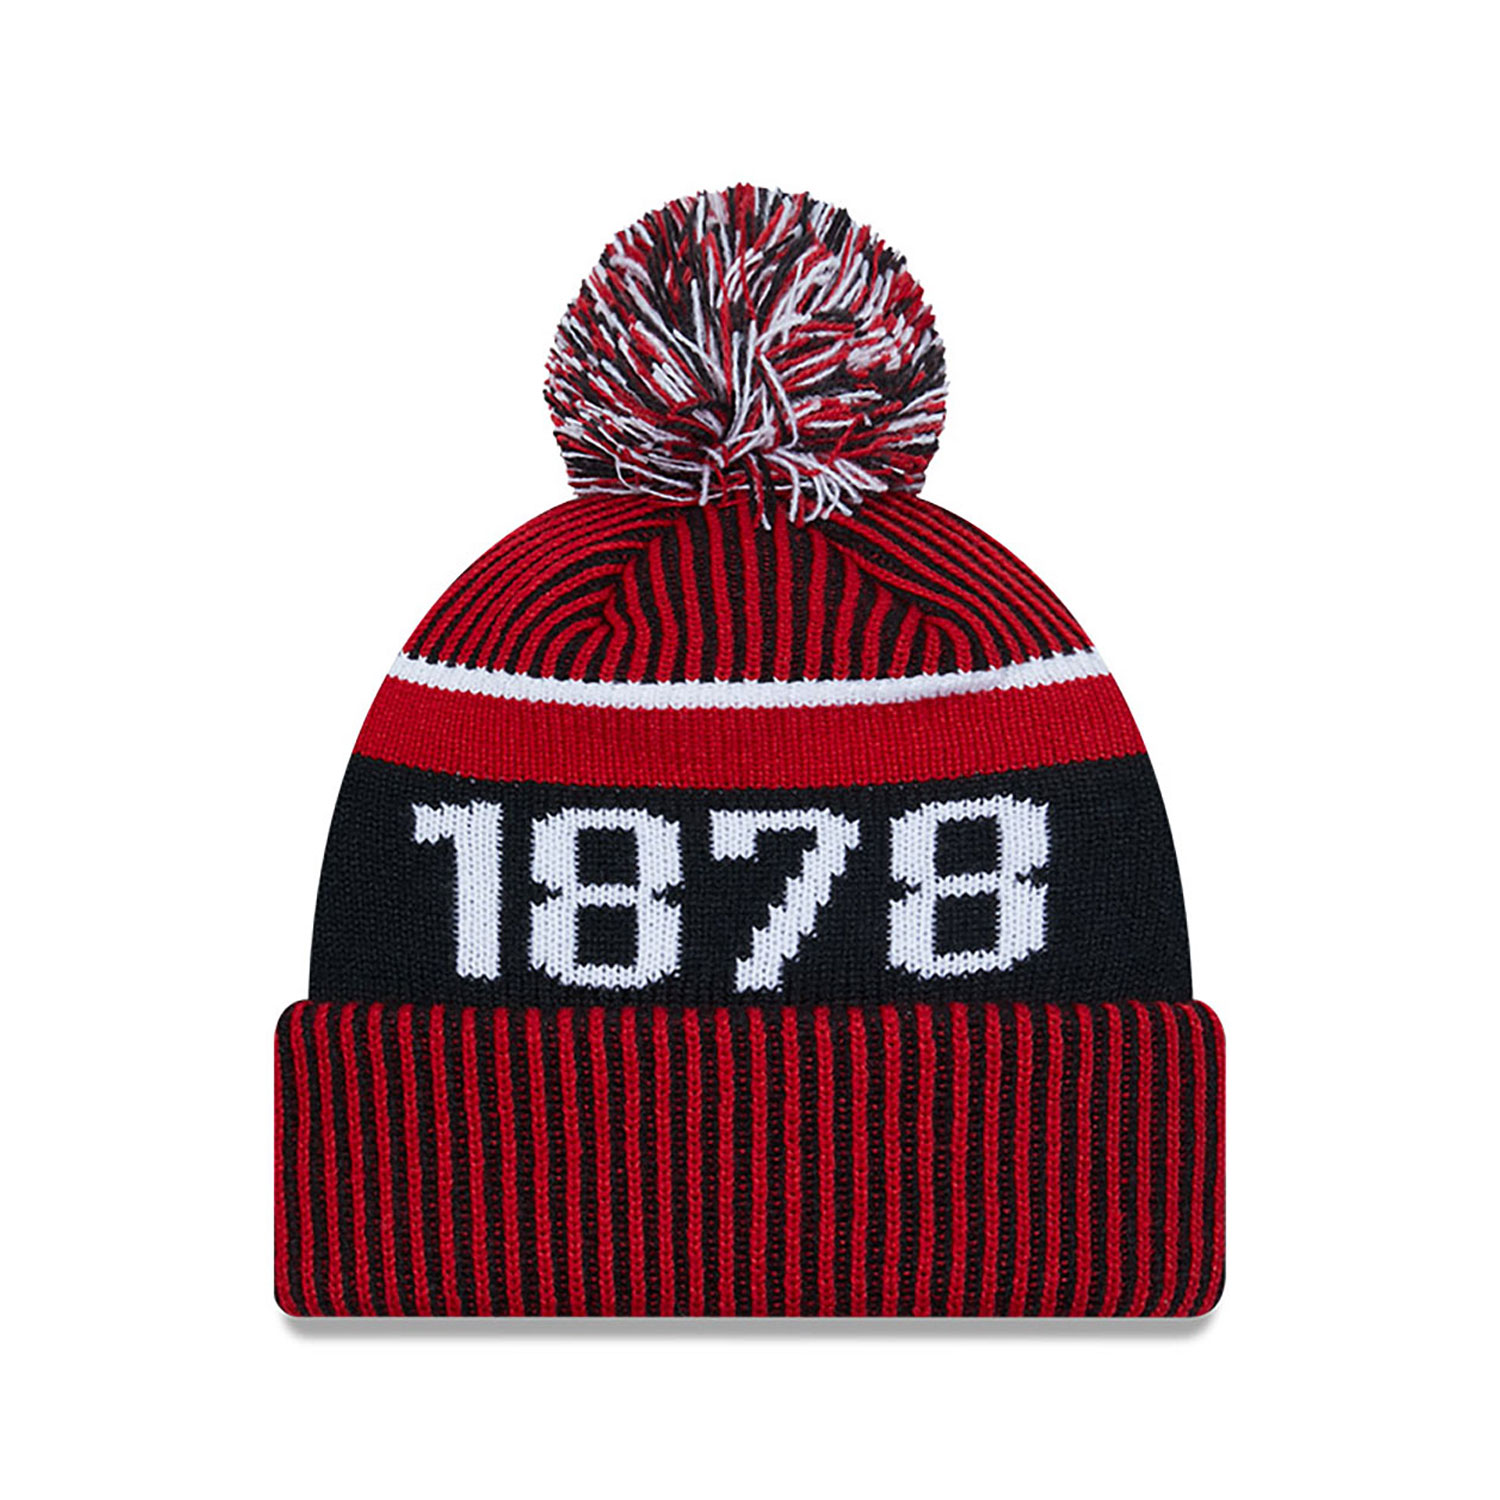 Manchester United FC Red Bobble Knit Beanie Hat